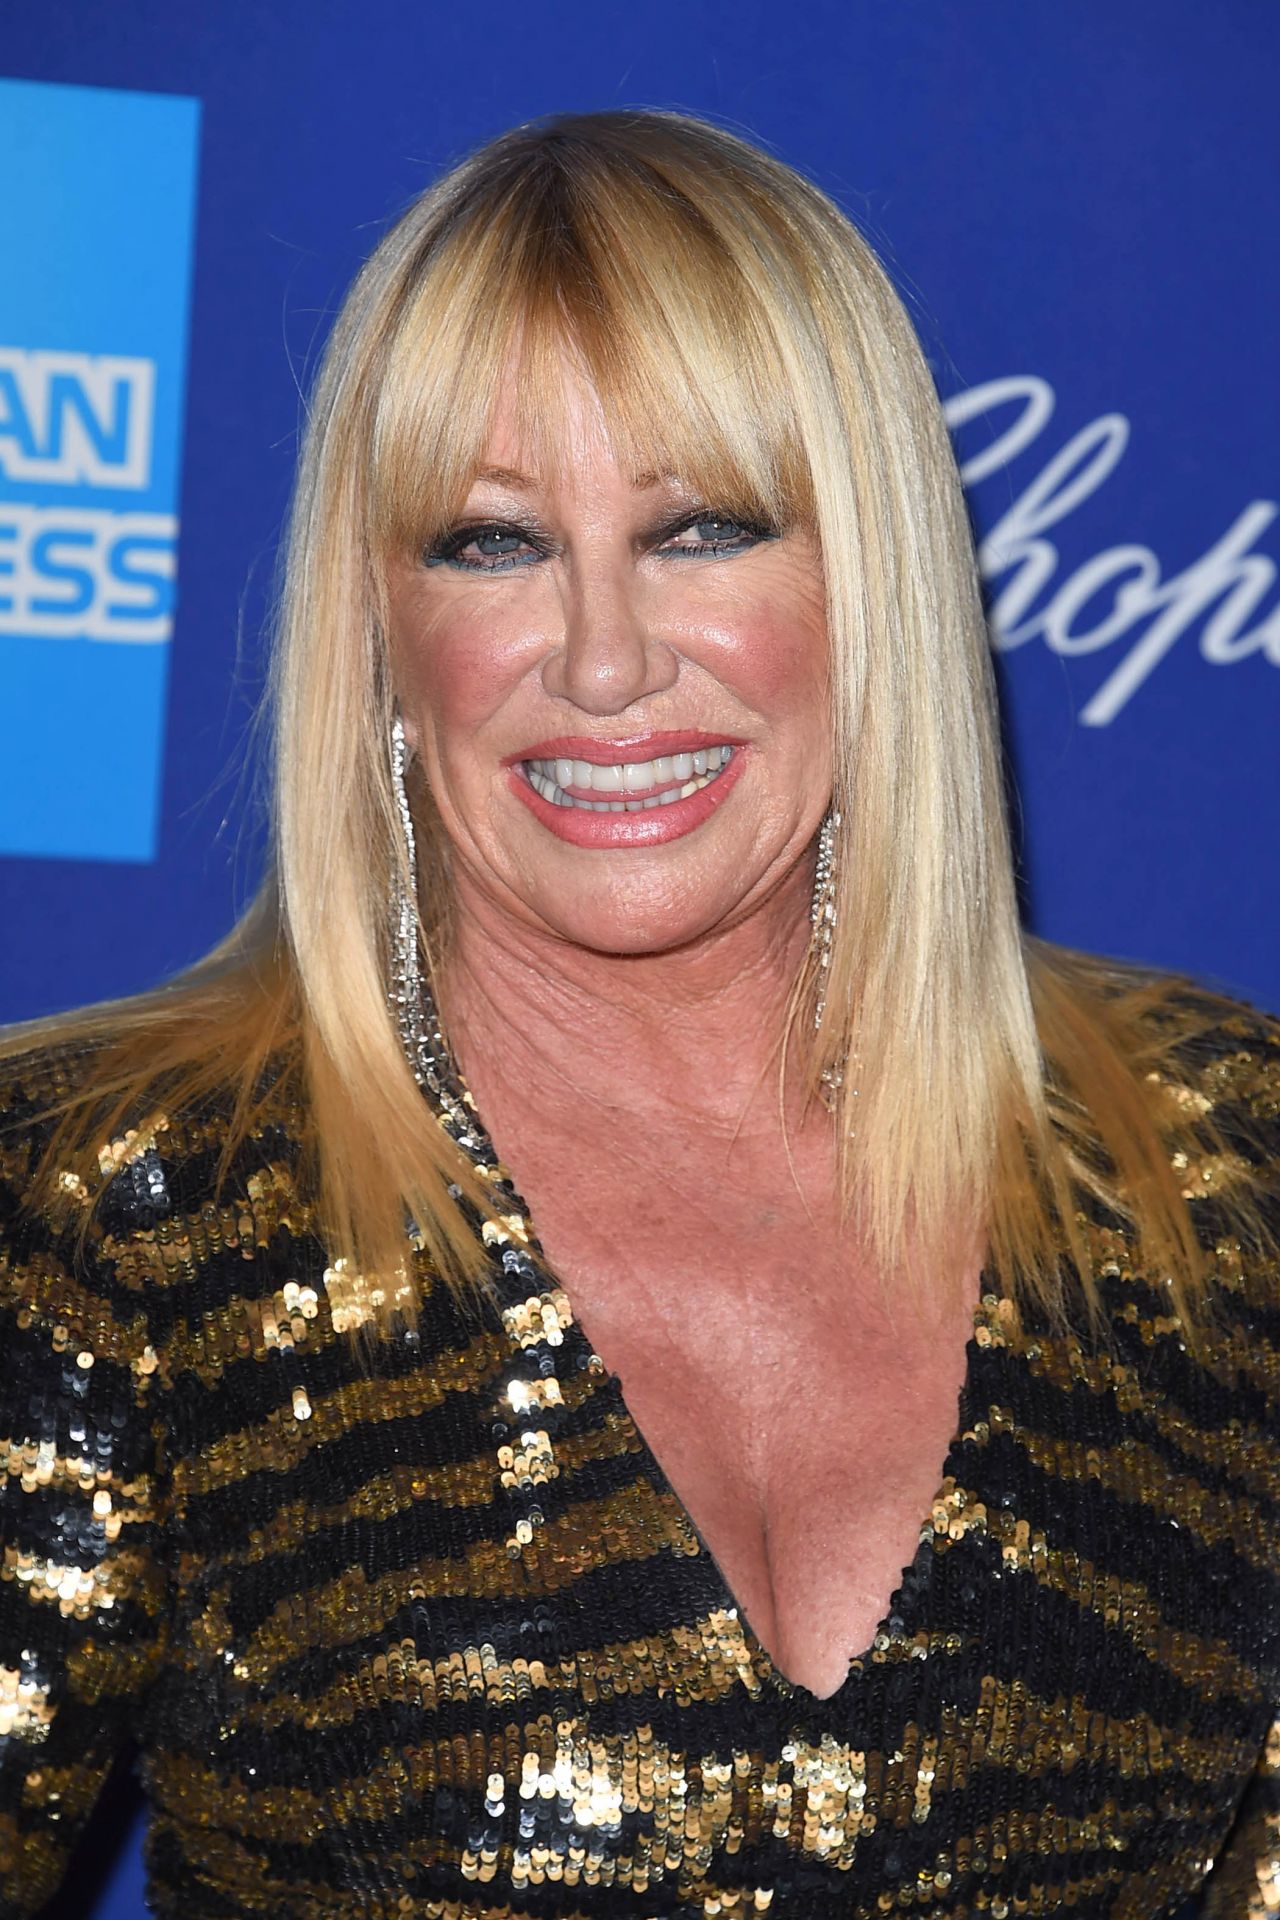 Suzanne Somers – Palm Springs International Film Festival Awards